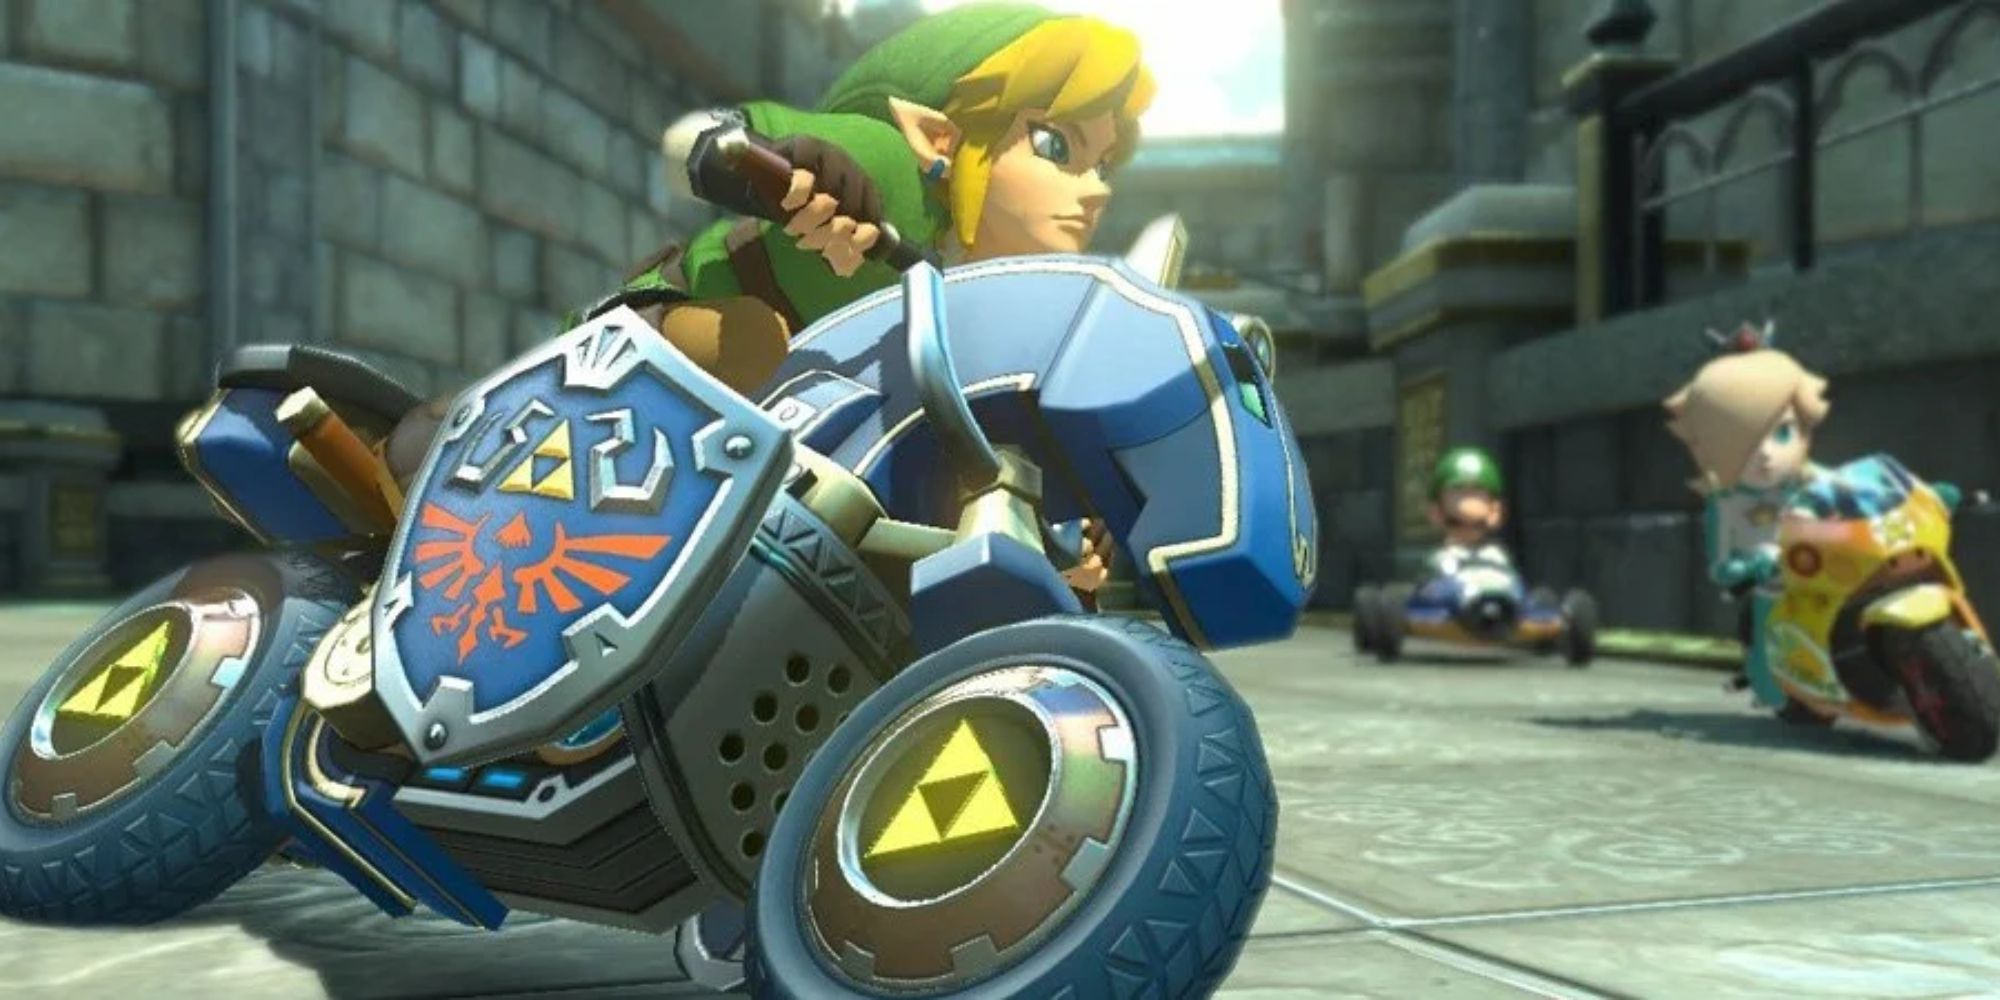 Mario Kart Vehicle Designs Link driving on his Master Cycle with Rosalina and Luigi racing after him in the background